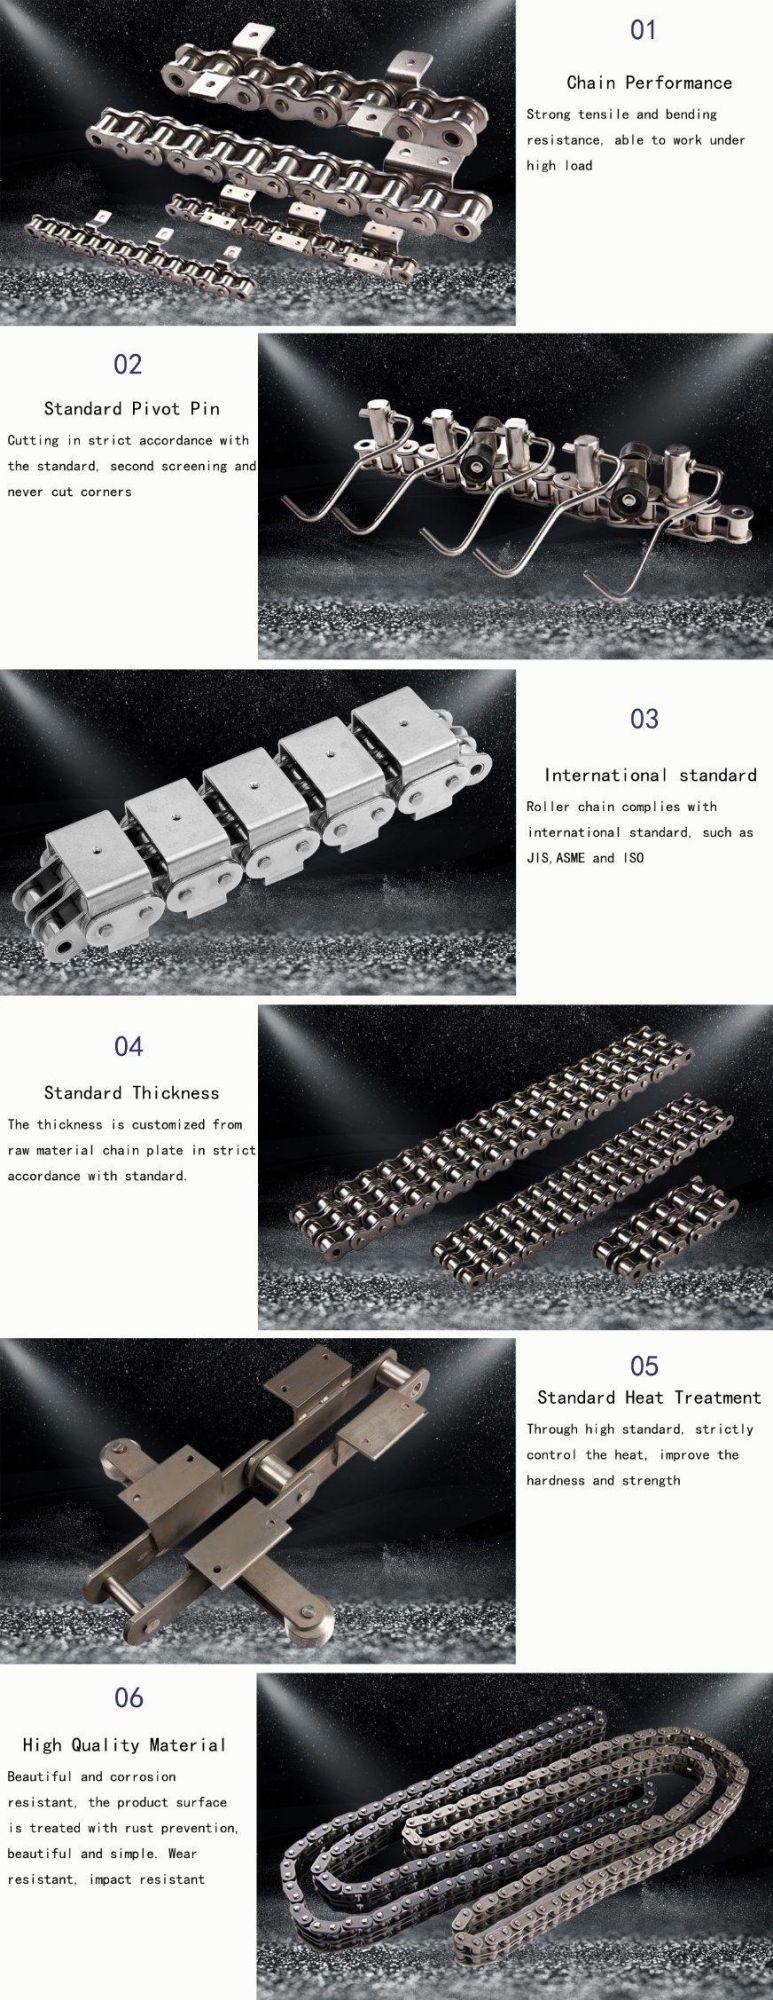 Heat Treatment Carbon Steel Stainless Steel Motorcycle Agricultural Machinery Industrial Plastic Conveyor Chains